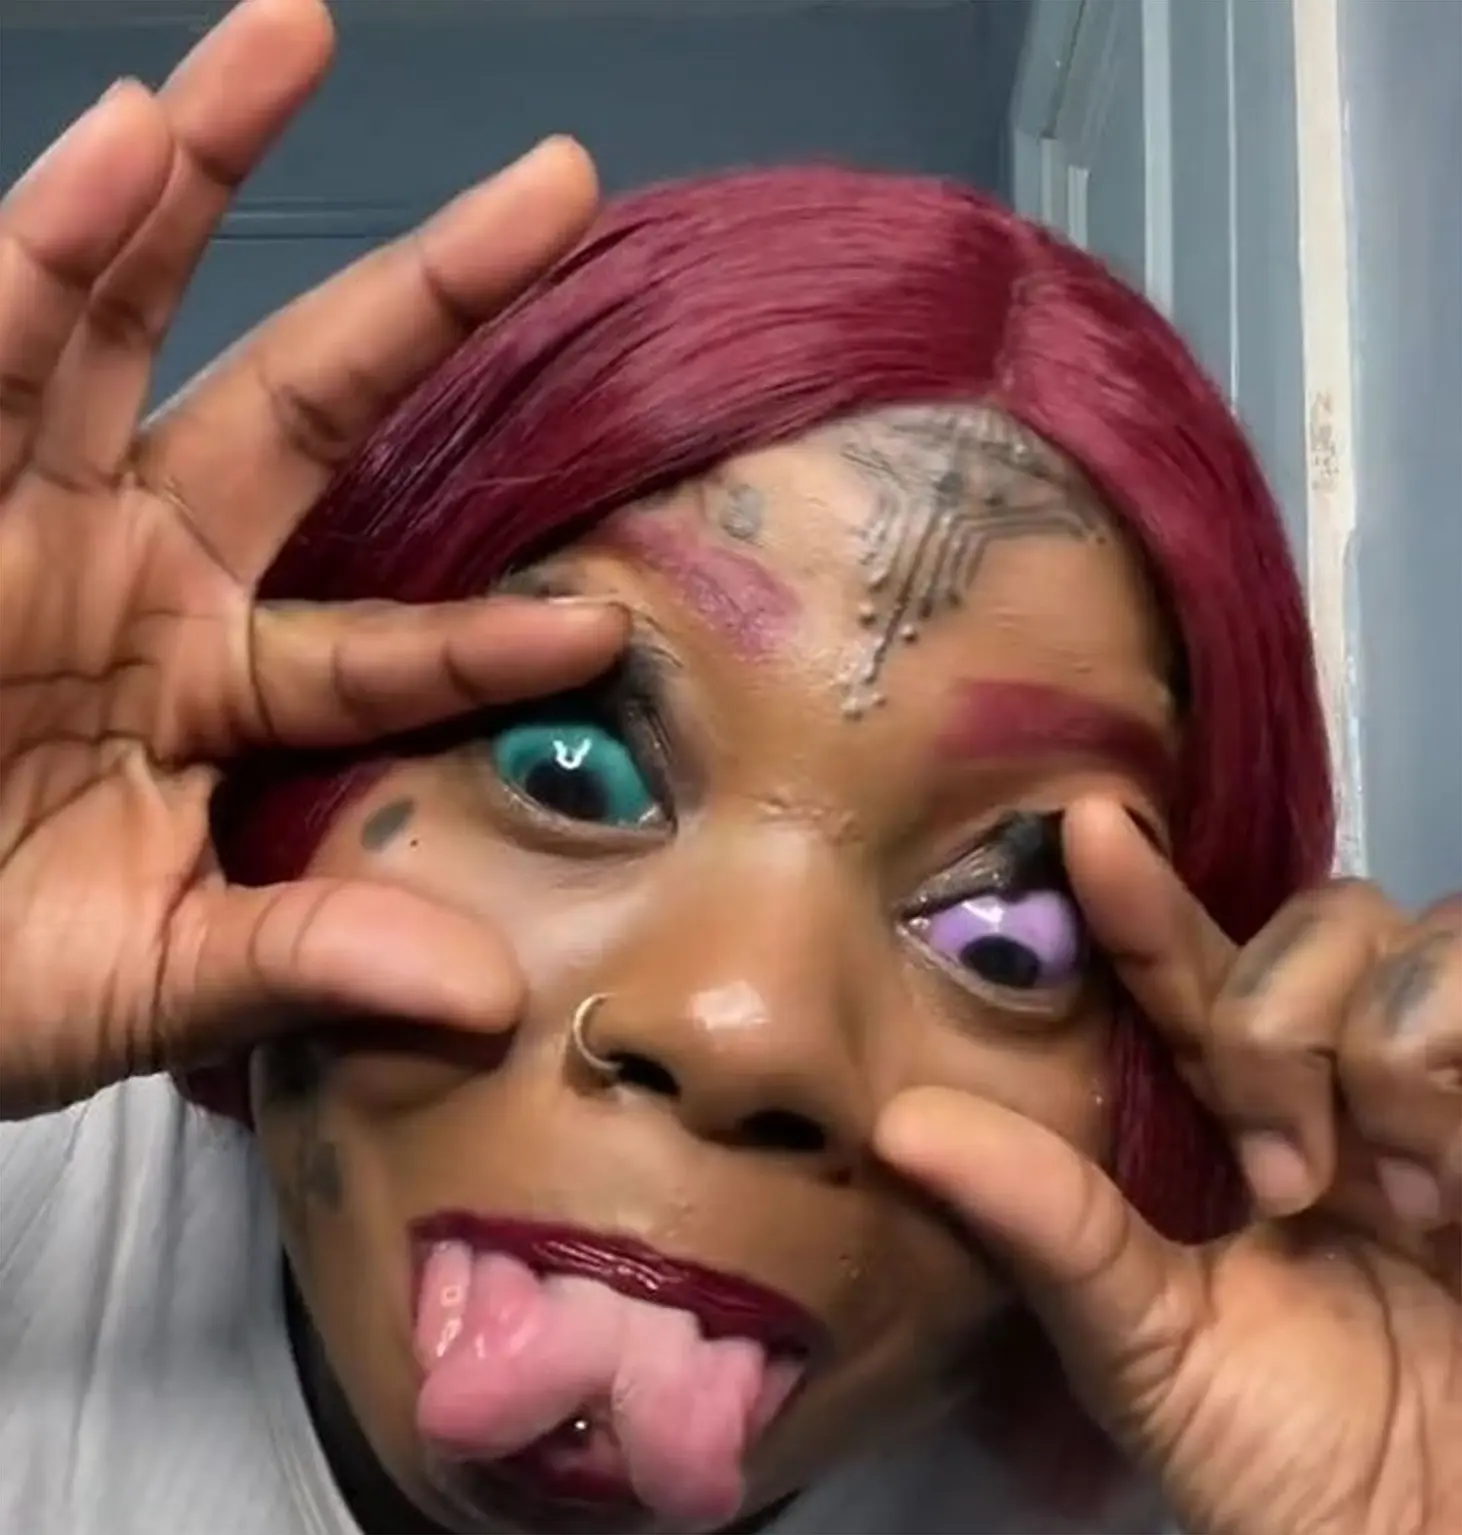 Mother on the verge of blindness after getting tattoos on both eyeballs to imitate Model [photos]